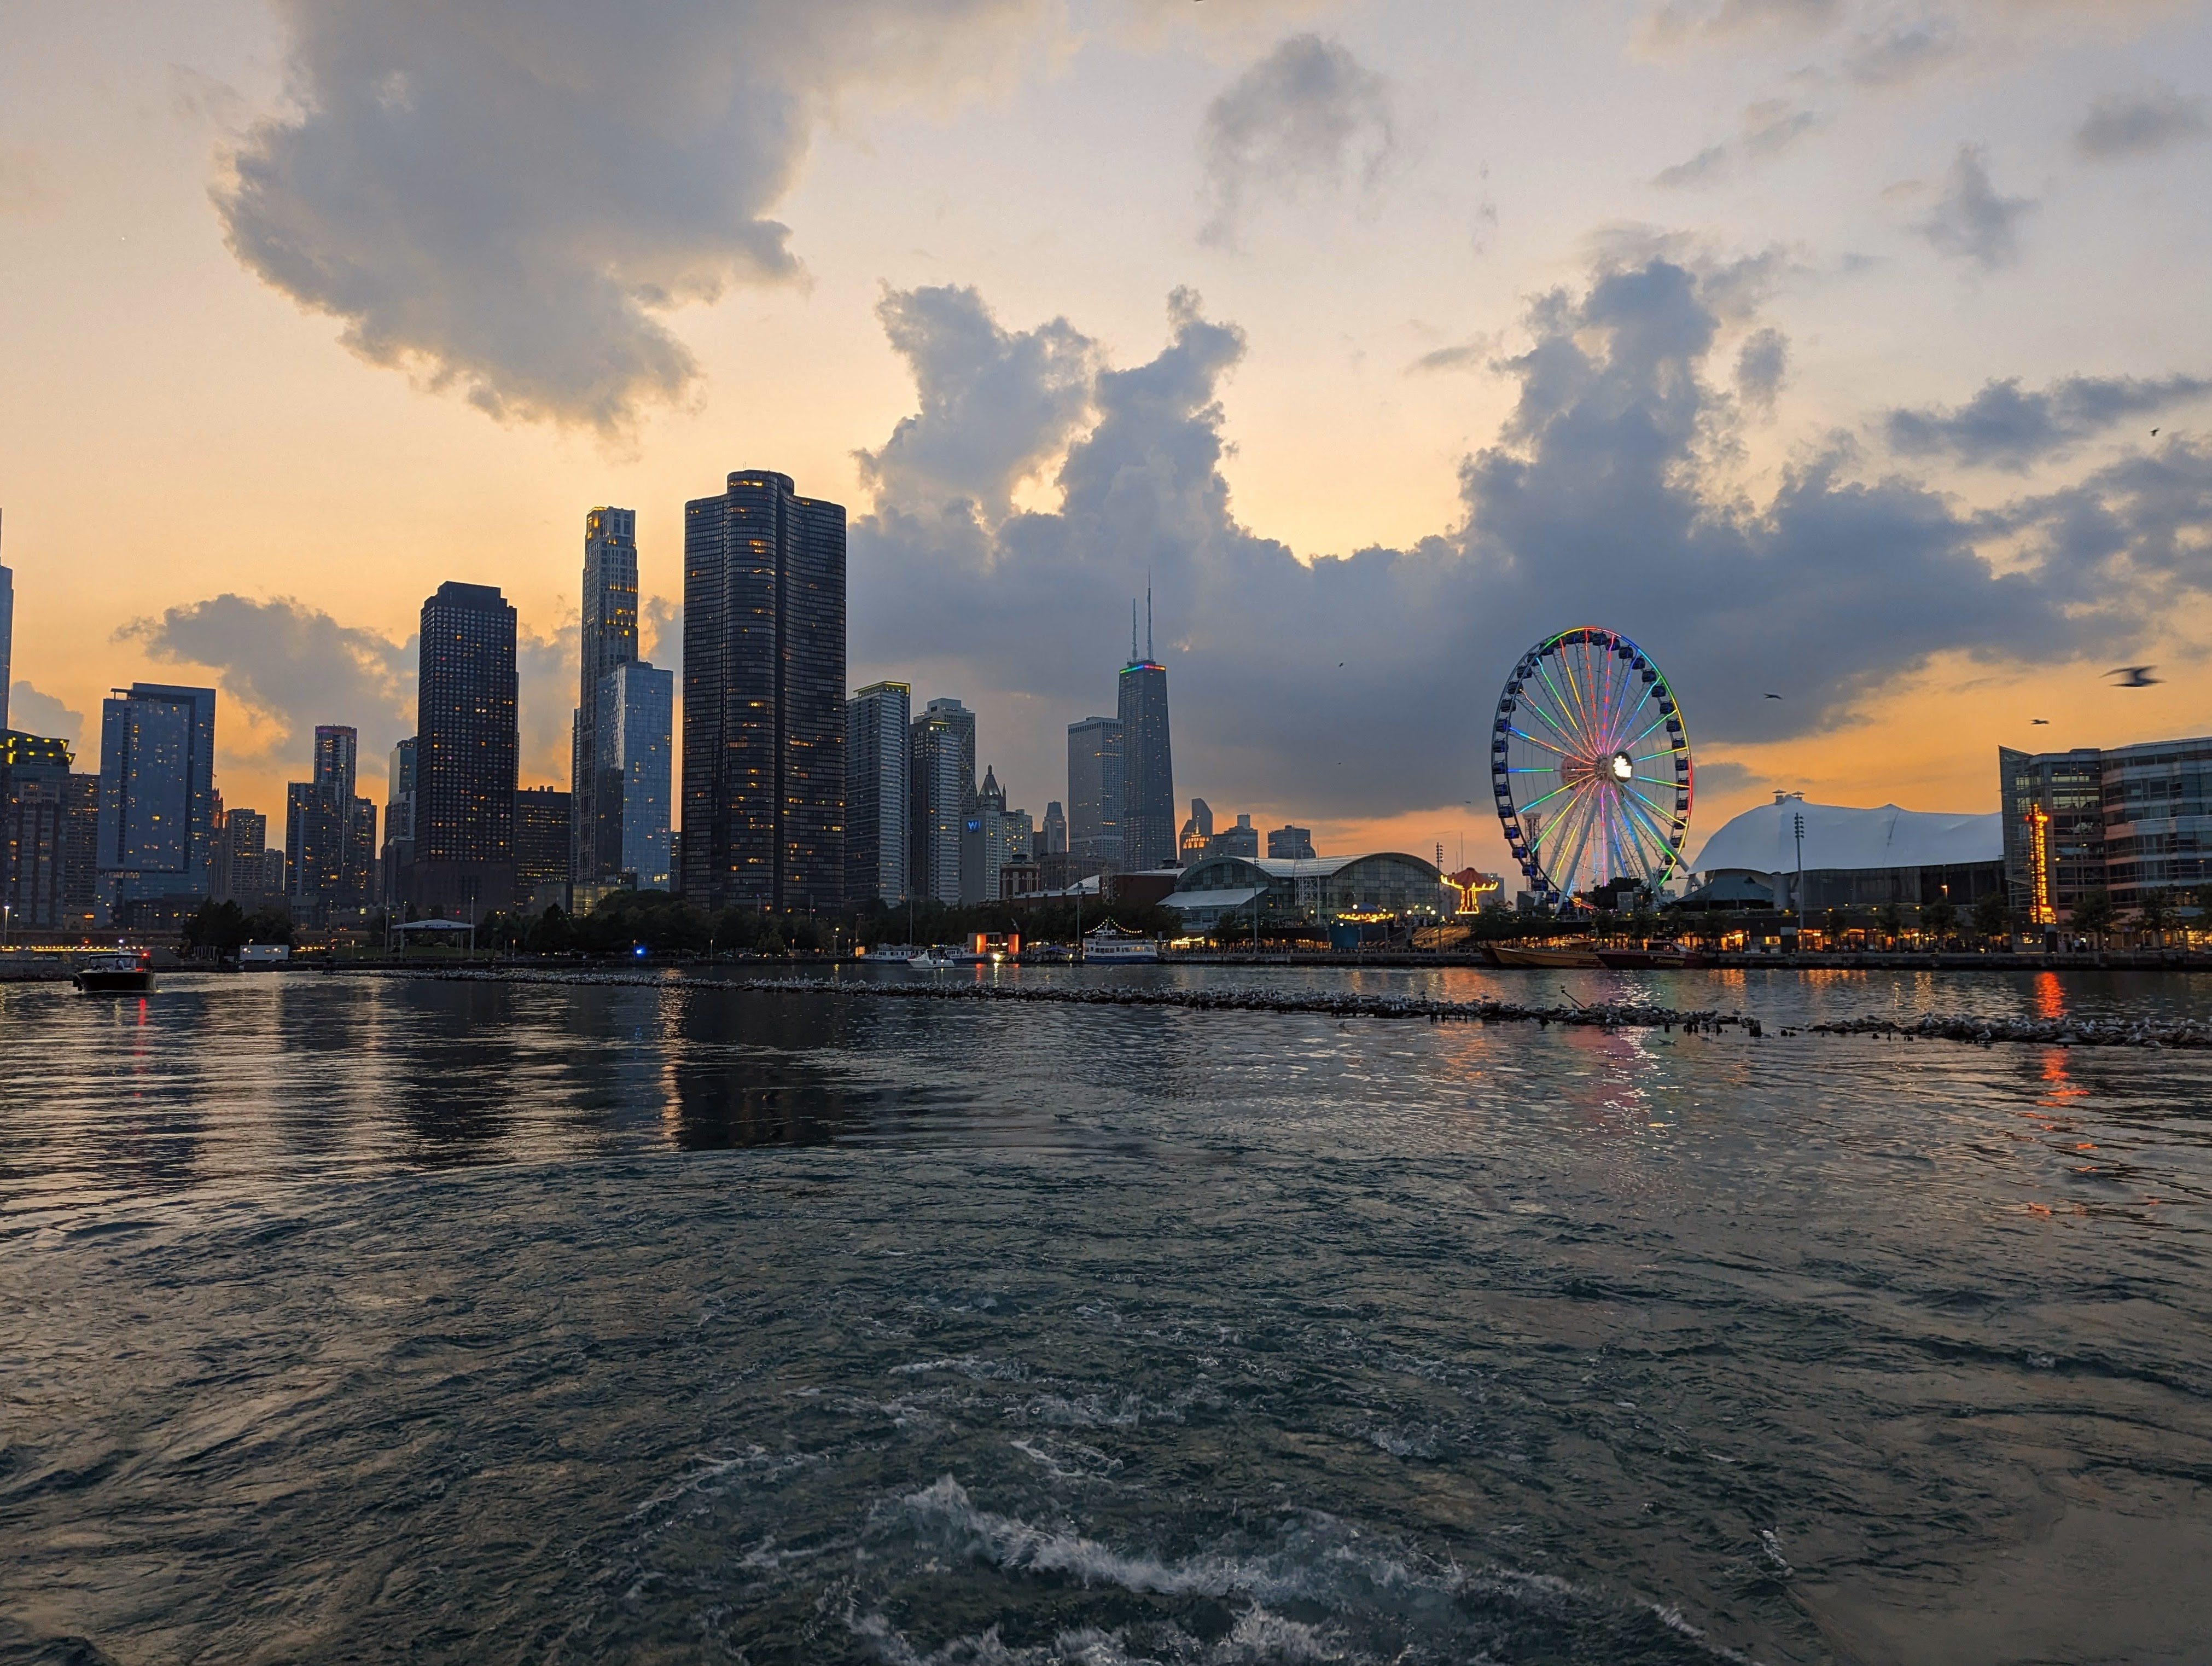 The nothern skyline of Chicago as seen form the Chicago river basin. The John Hancock building and the Navy Piero ferris wheel can be seen. The sunset contains many warm colors, such as orange. All buildings in the shot with lights have the pride colors displayed, as it was taken during pride month.